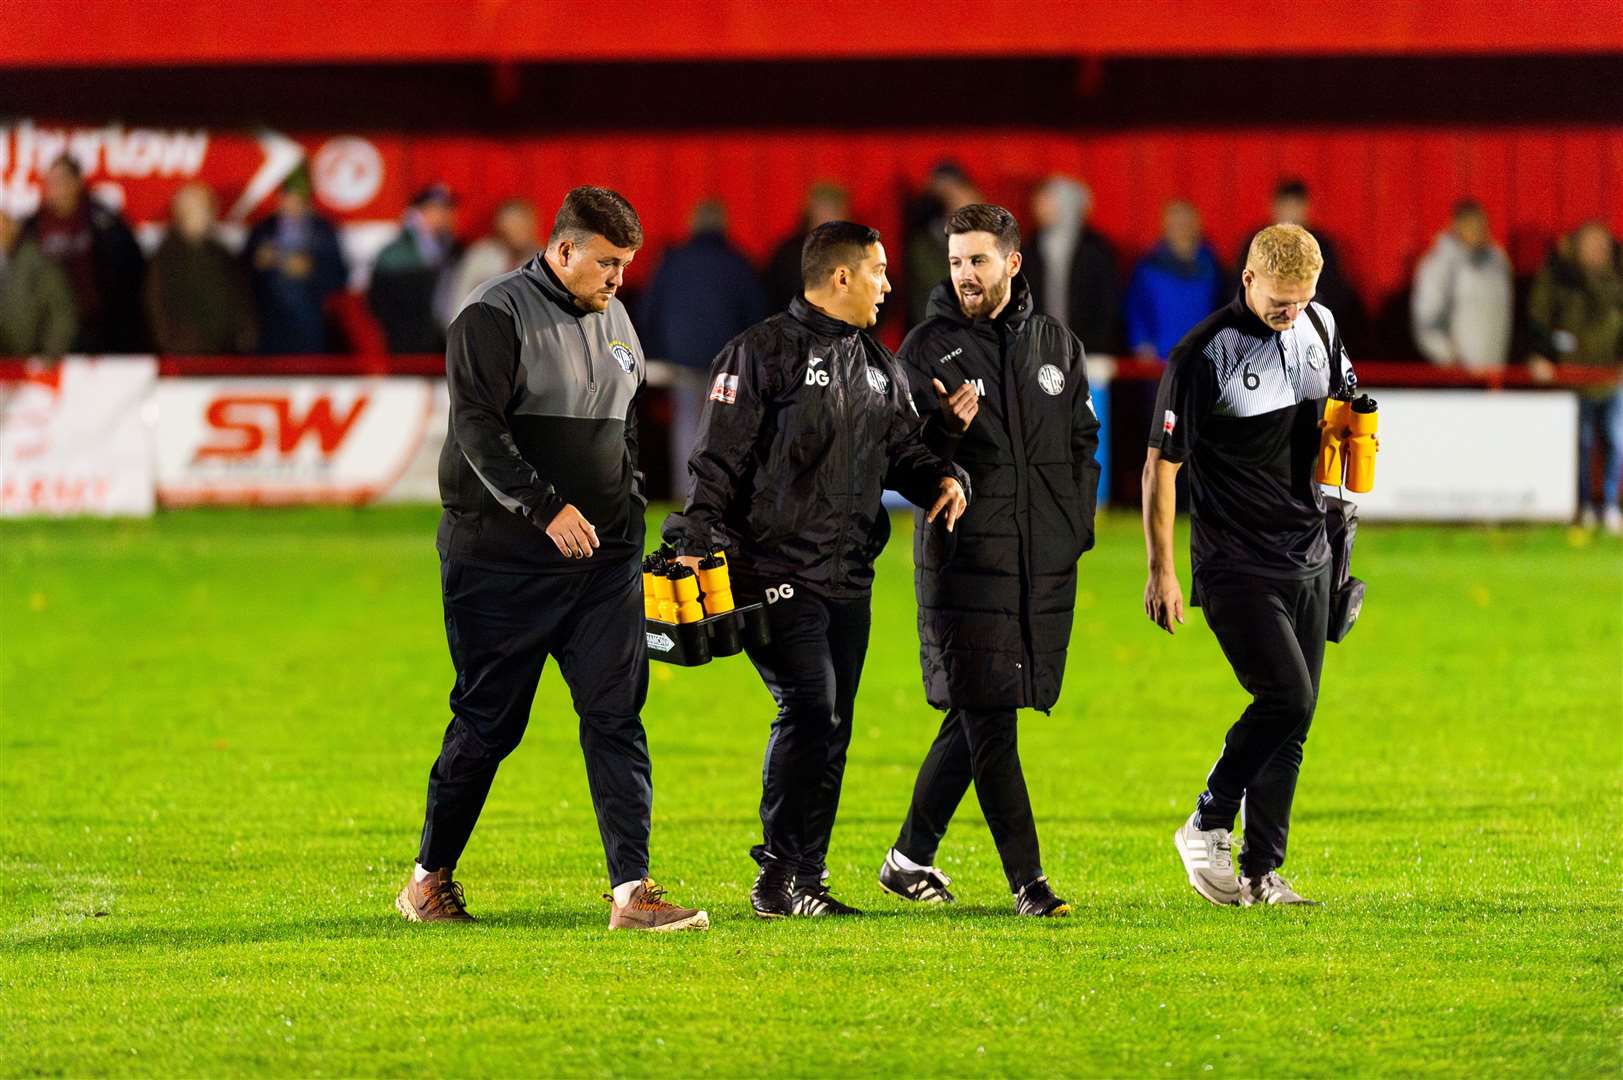 The Heacham management and coaching team leaving the pitch at half-time during Wednesday night's derby clash at the SCL Memorial Field. Picture: Ian Burt